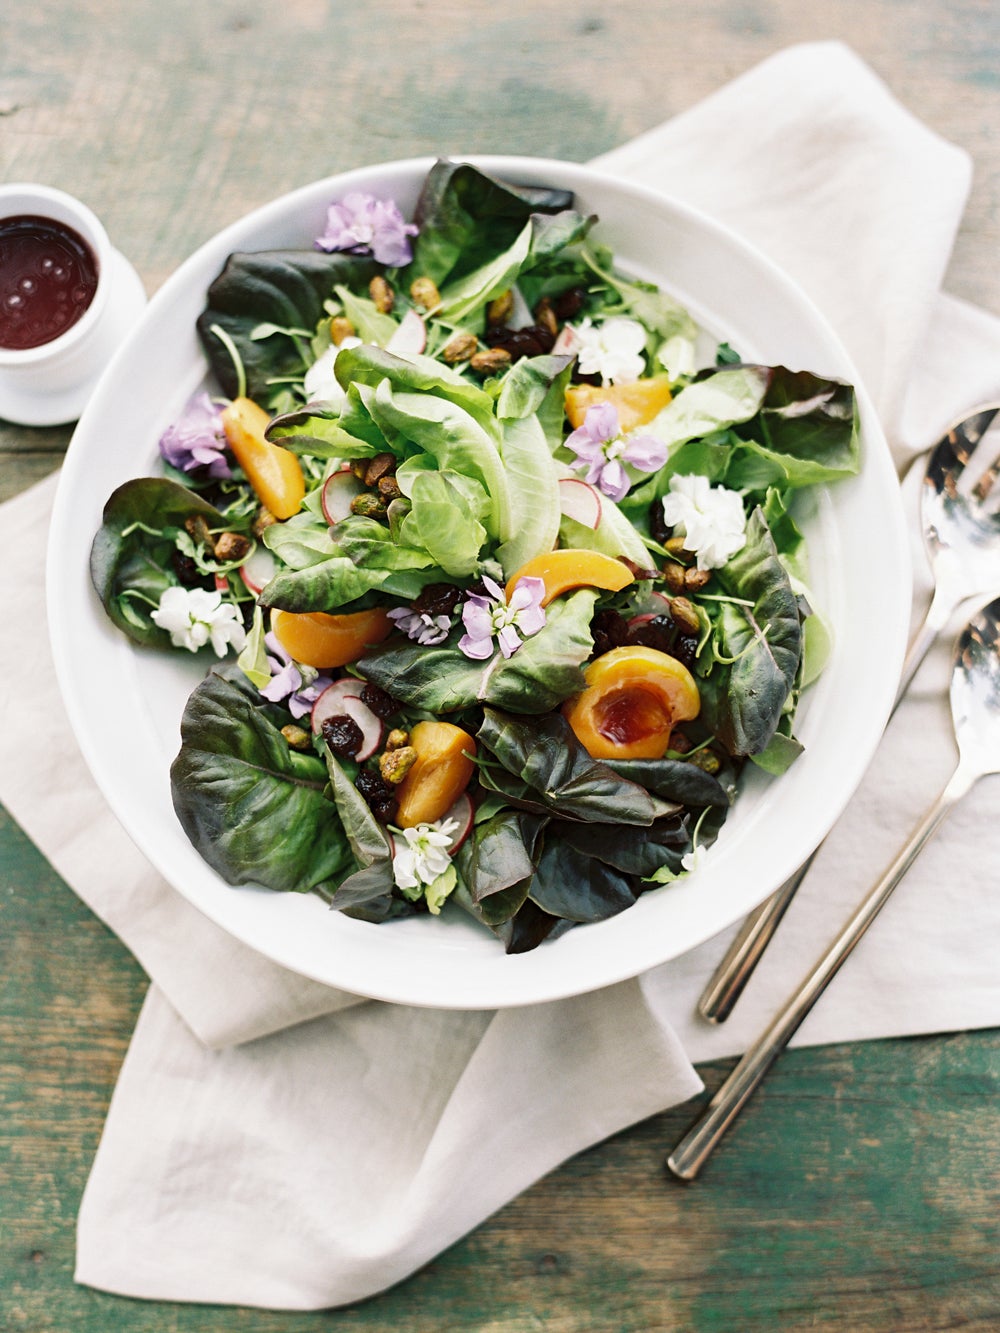 white bowl with salad of dark greens, oranges, lilac flowers